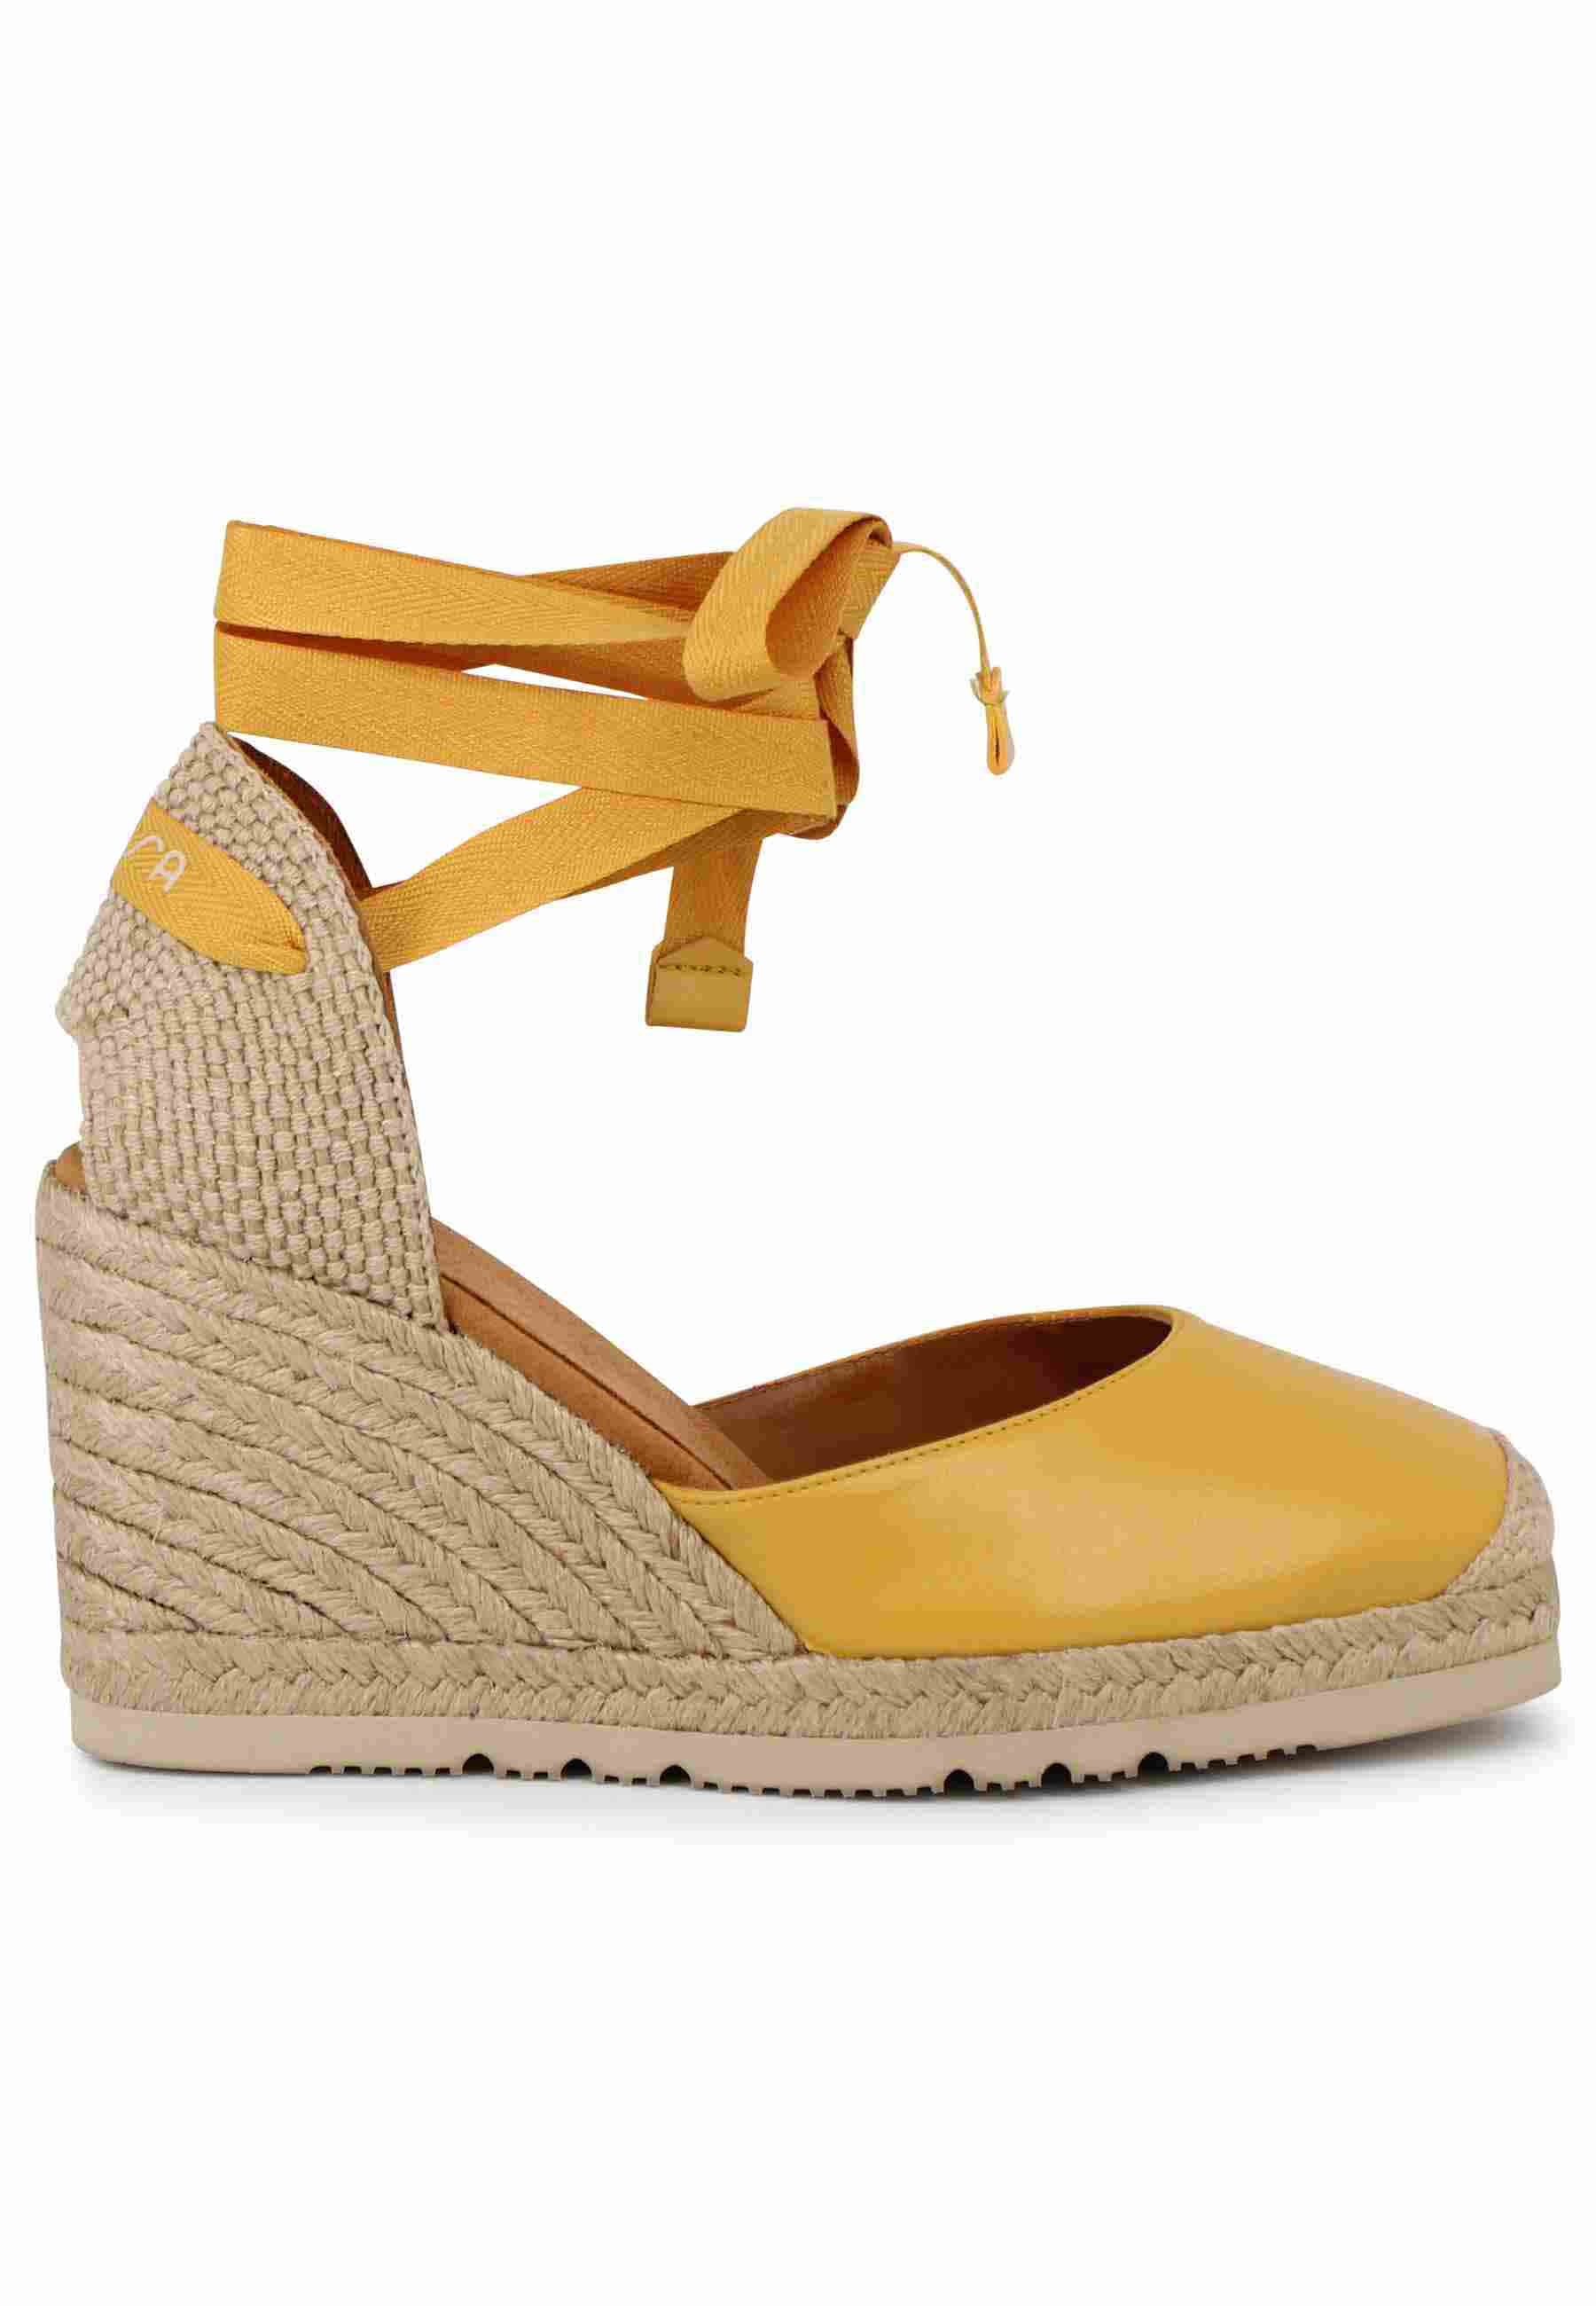 Women's yellow leather espadrilles sandals with ankle laces and high wedge